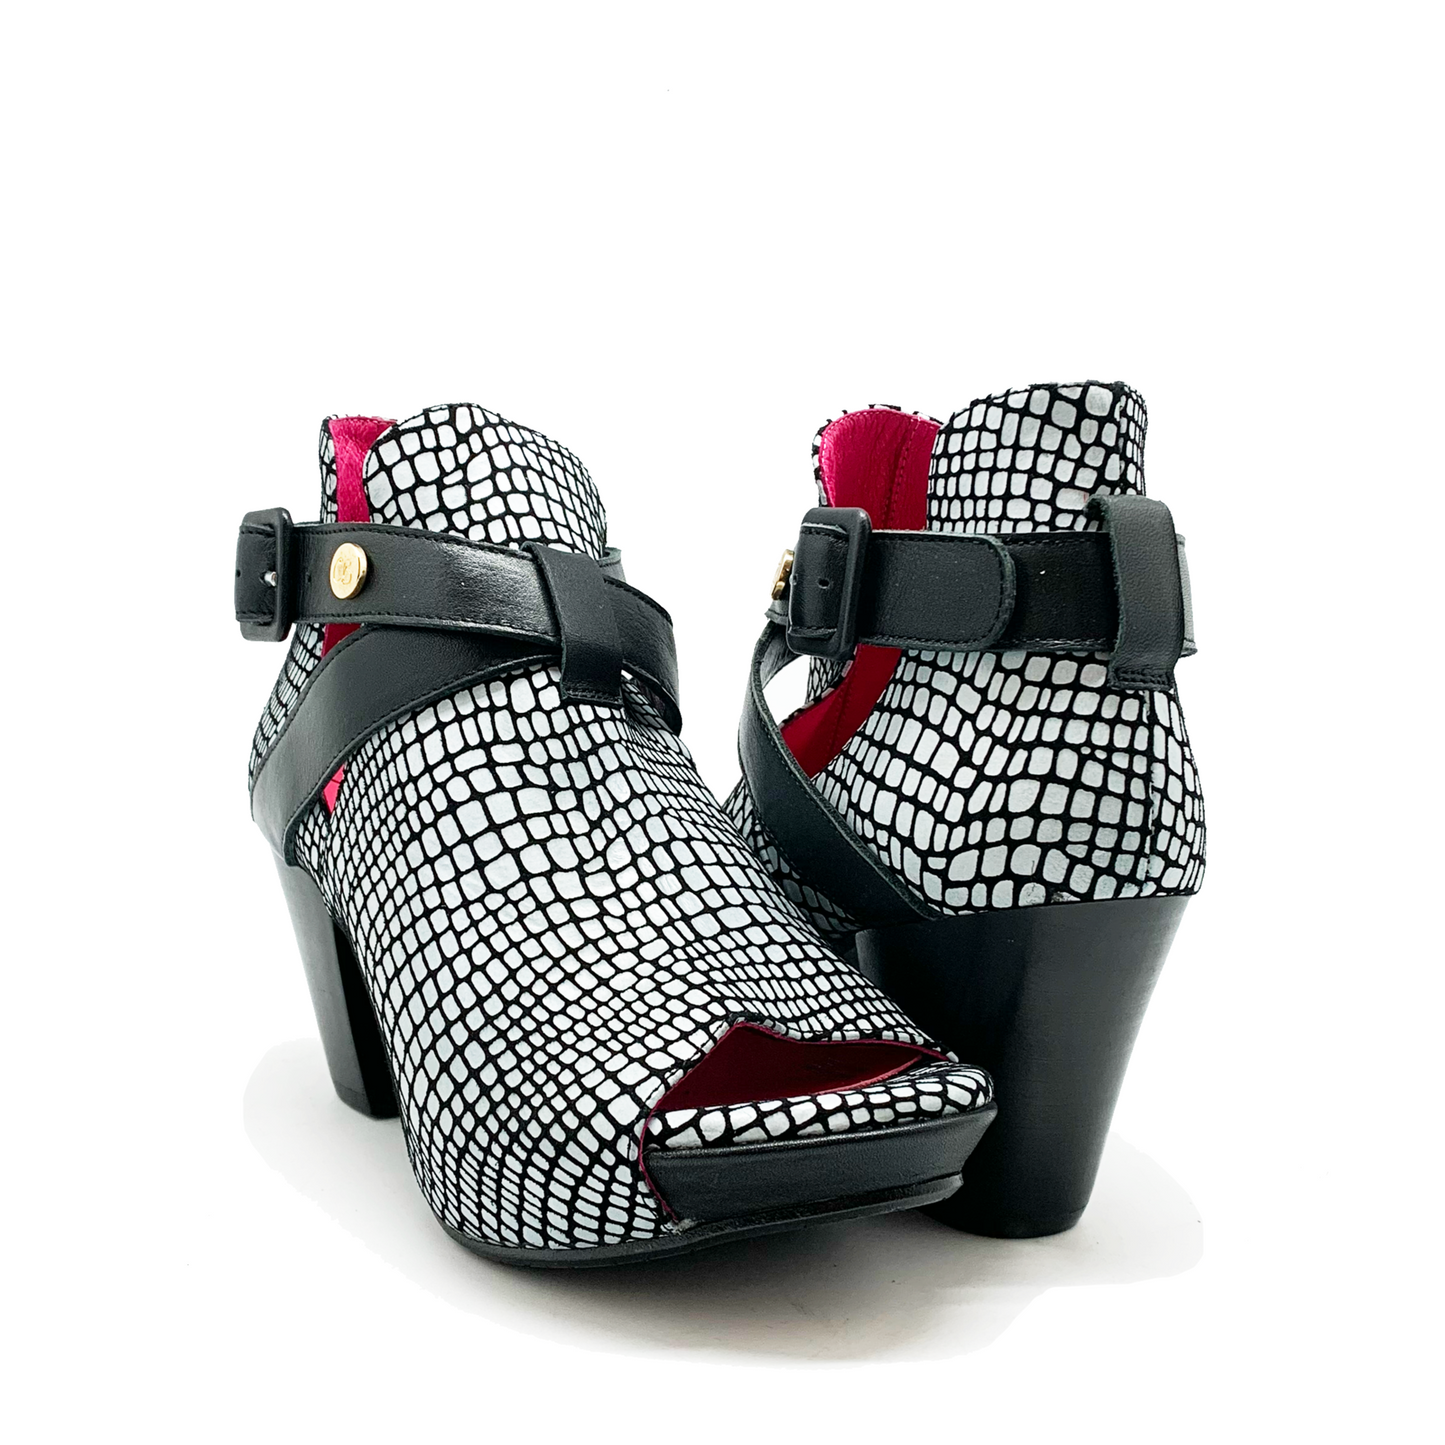 Rouge - Black and White shoe boot